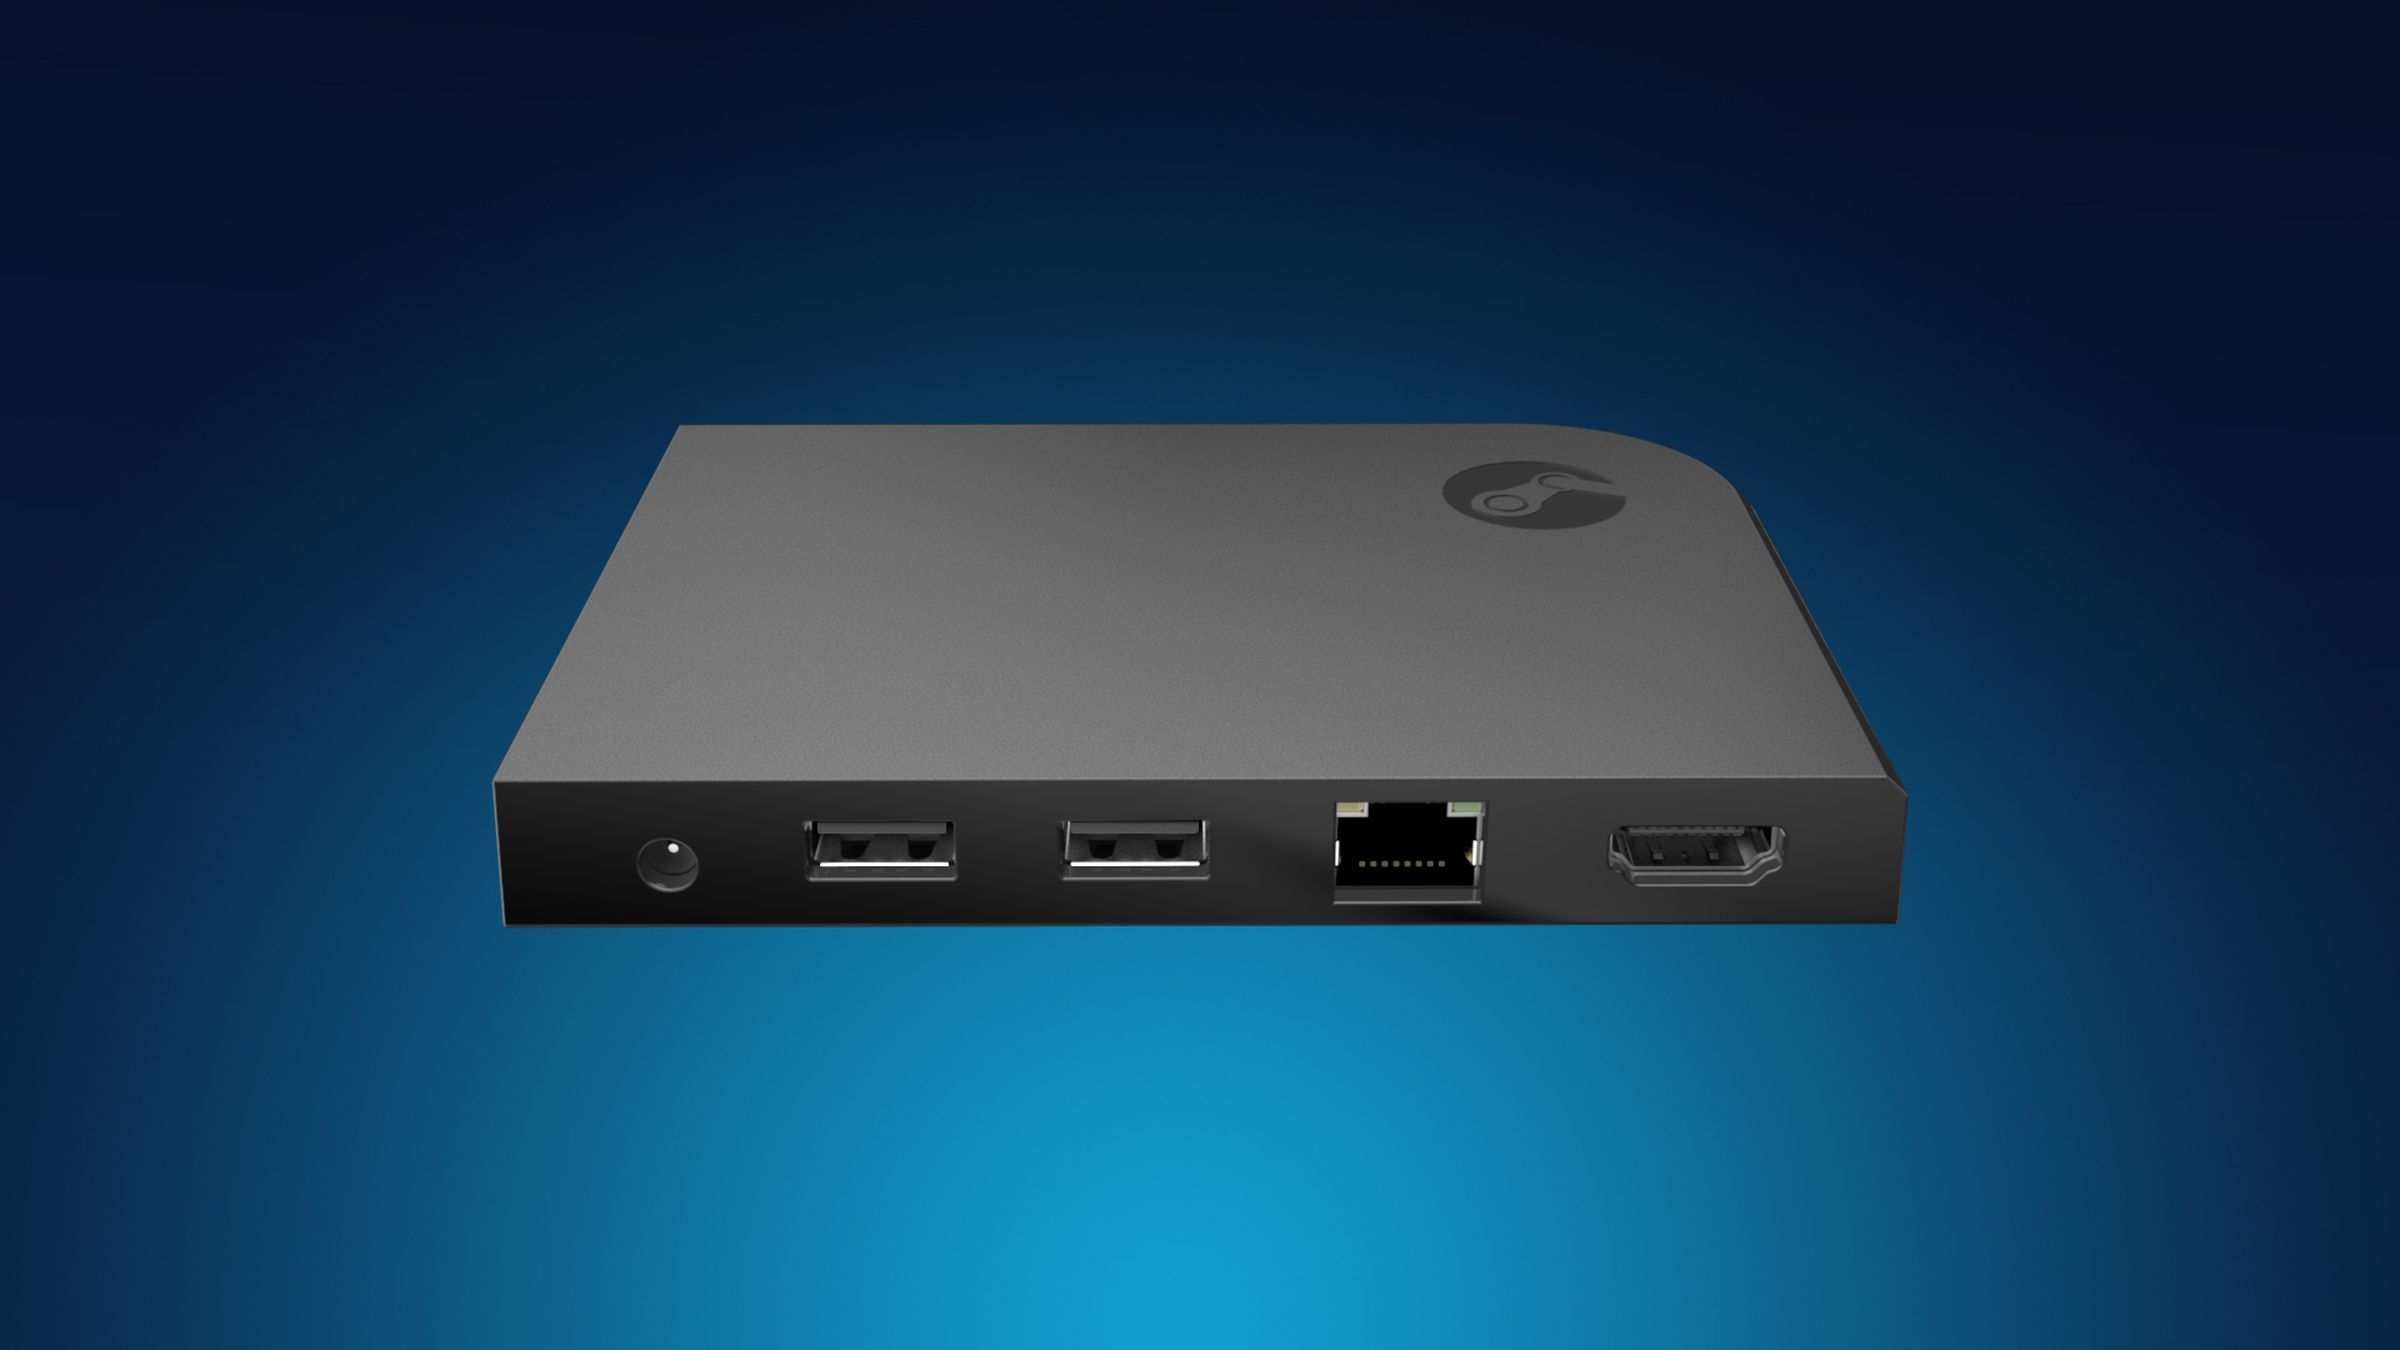 A Steam Link on a blue backdrop.